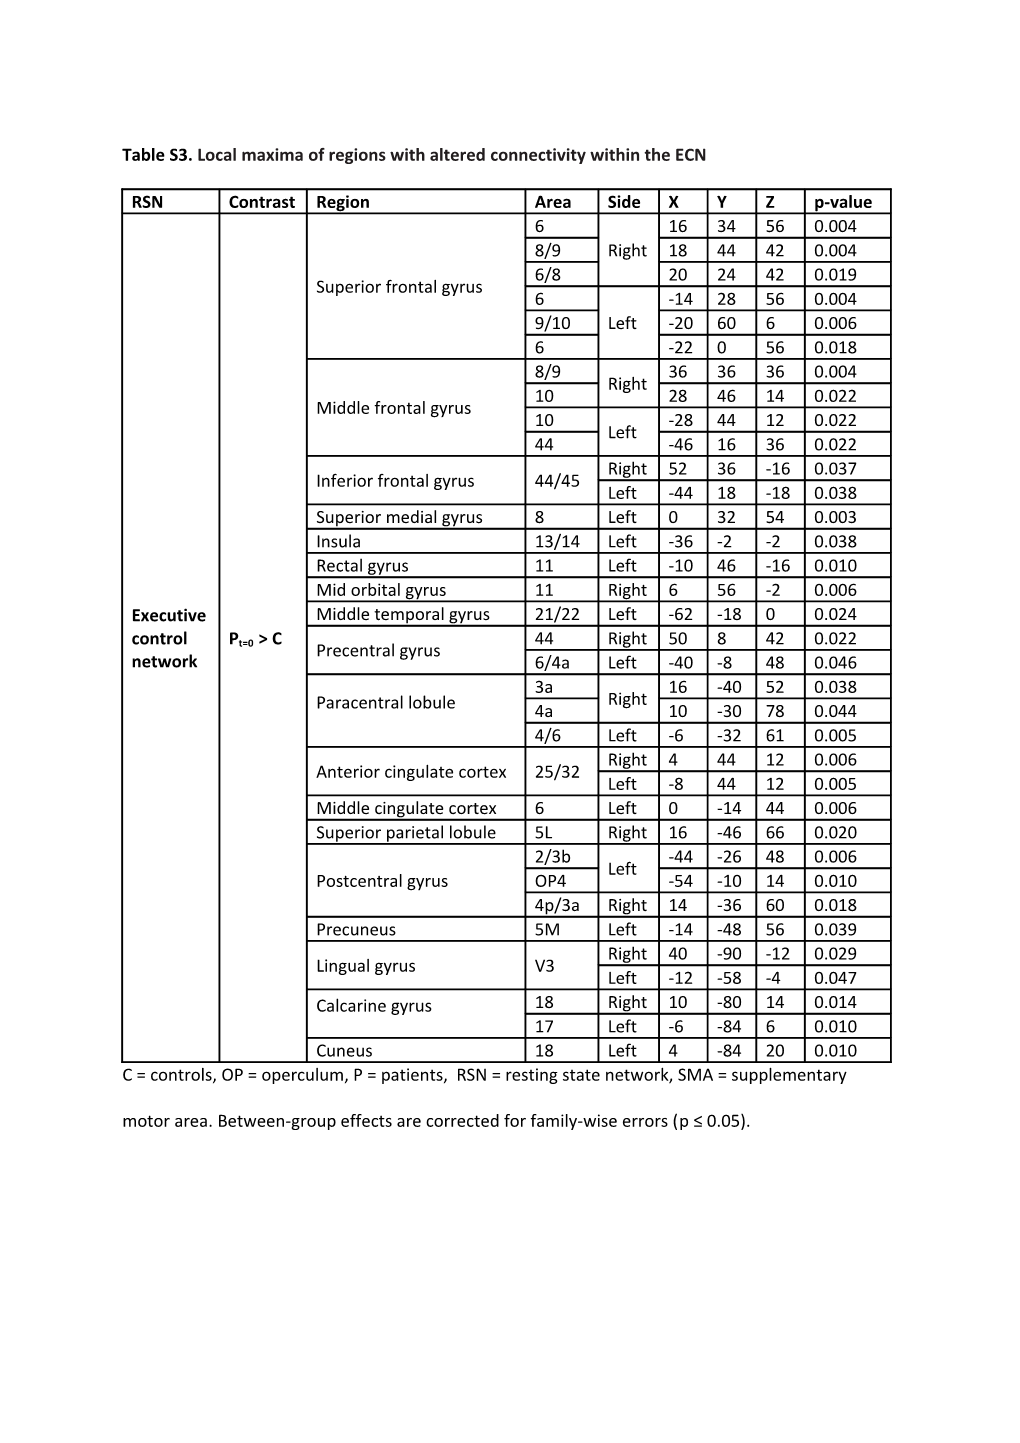 Table S3. Local Maxima of Regions with Altered Connectivity Within the ECN